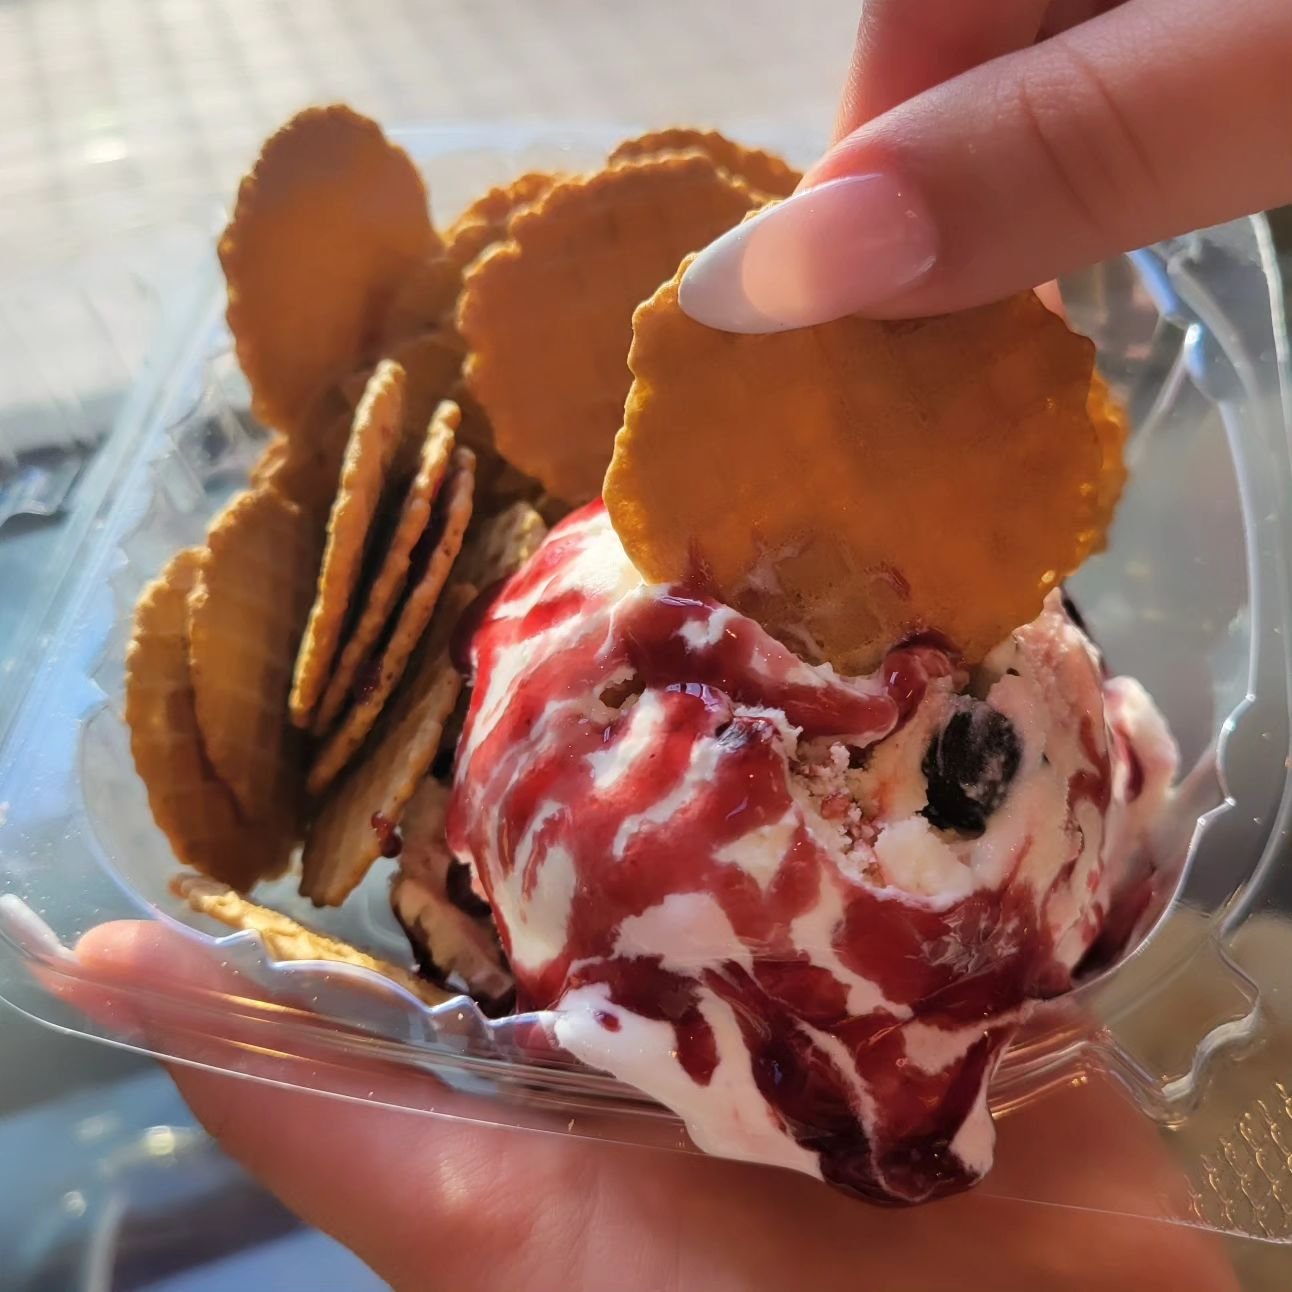 Waffle Nacho Chip Sundaes Now Ready for your weekend with your favorite flavors &amp; toppings to dip @mickeys_ice_cream

Open 1-9pm Daily
April to July